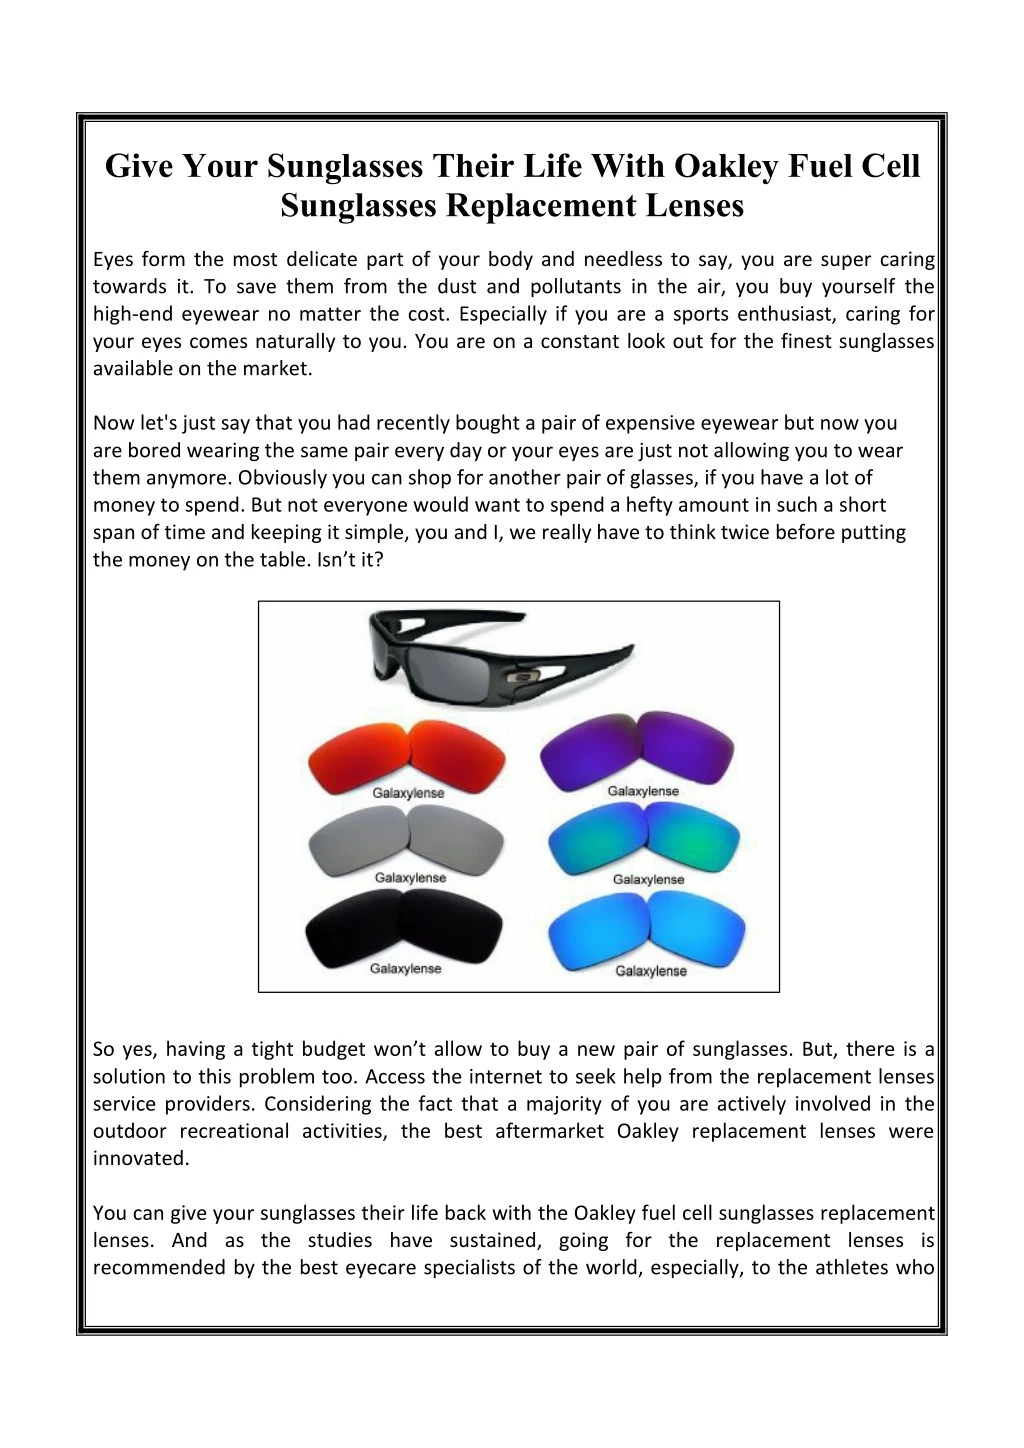 give your sunglasses their life with oakley fuel